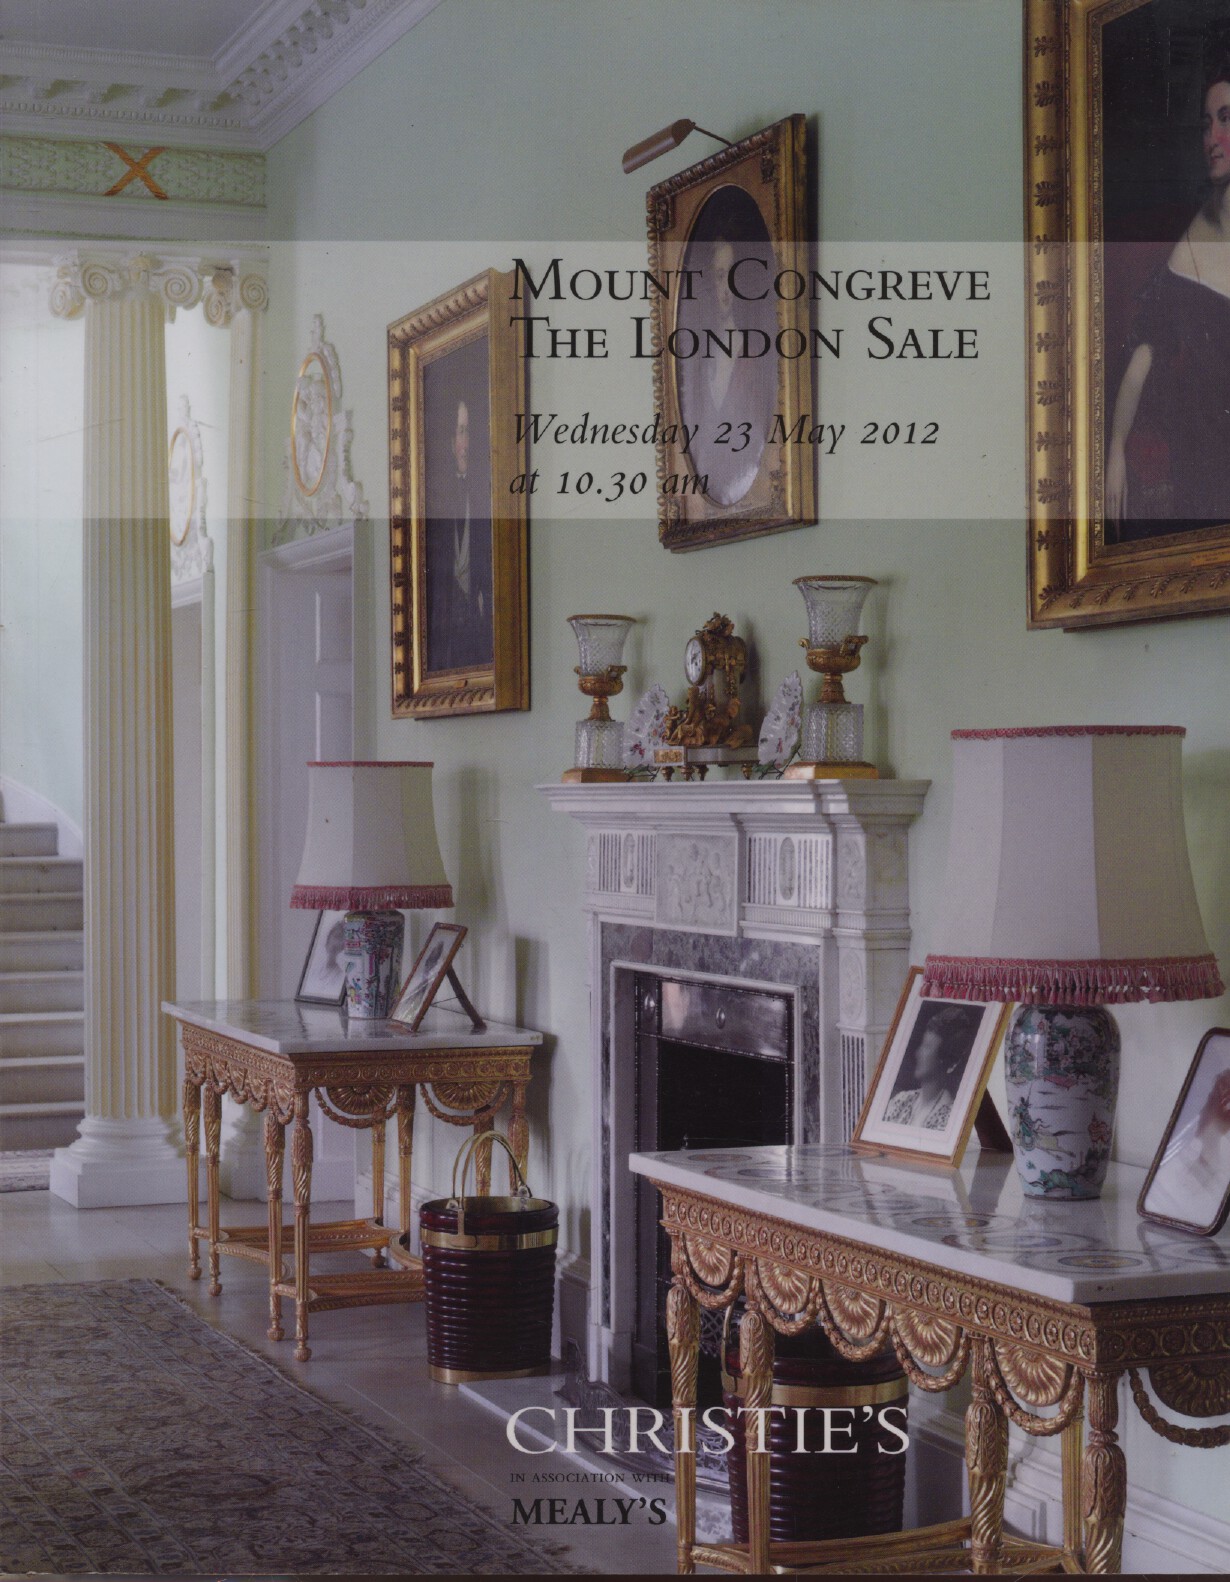 Christies May 2012 Mount Congreve - The London Sale